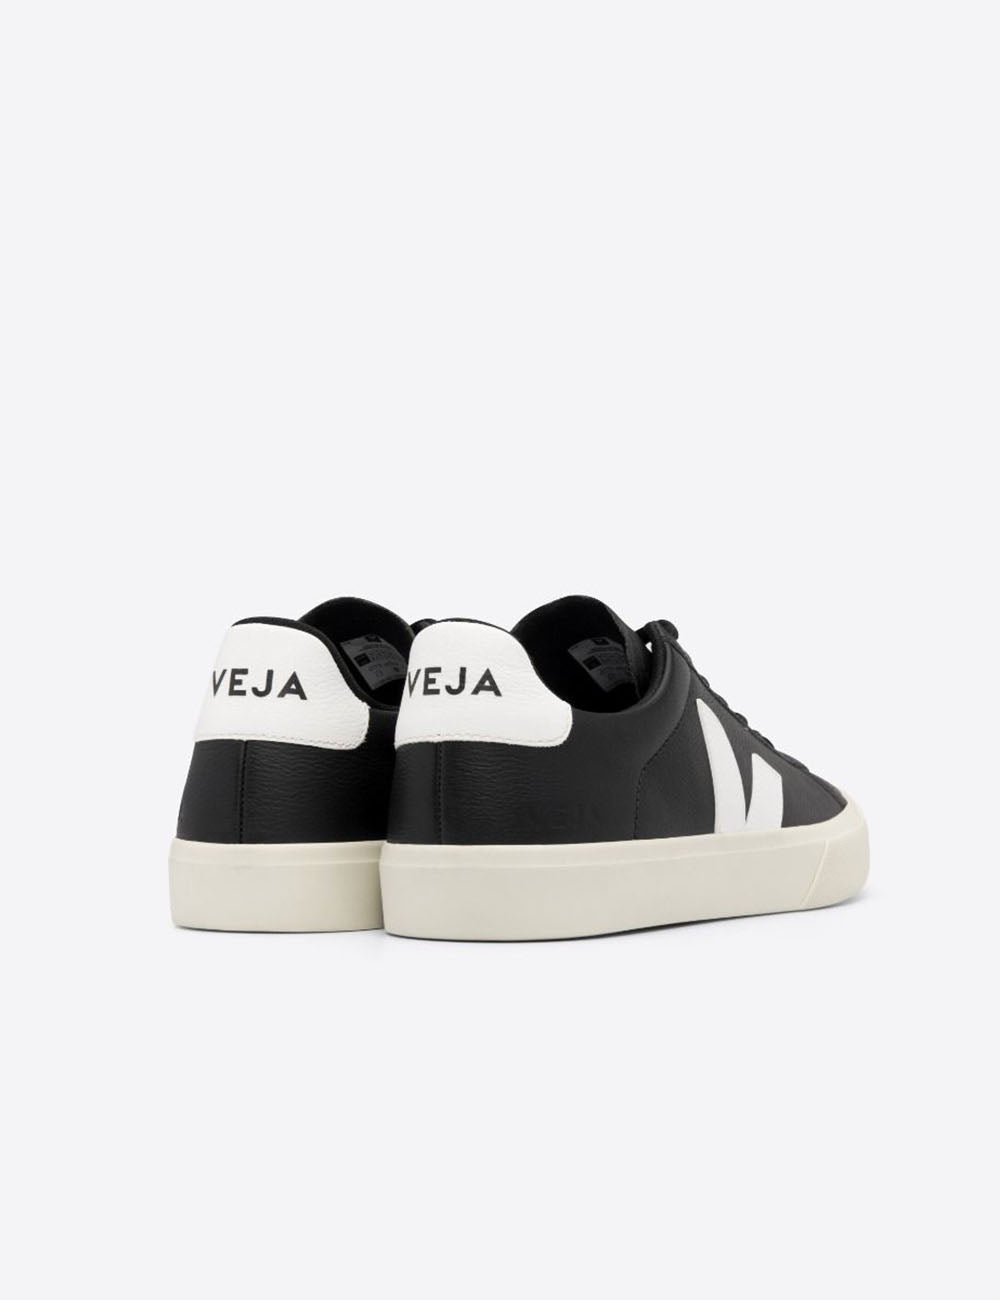 VEJA CAMPO CHFREE LEATHER